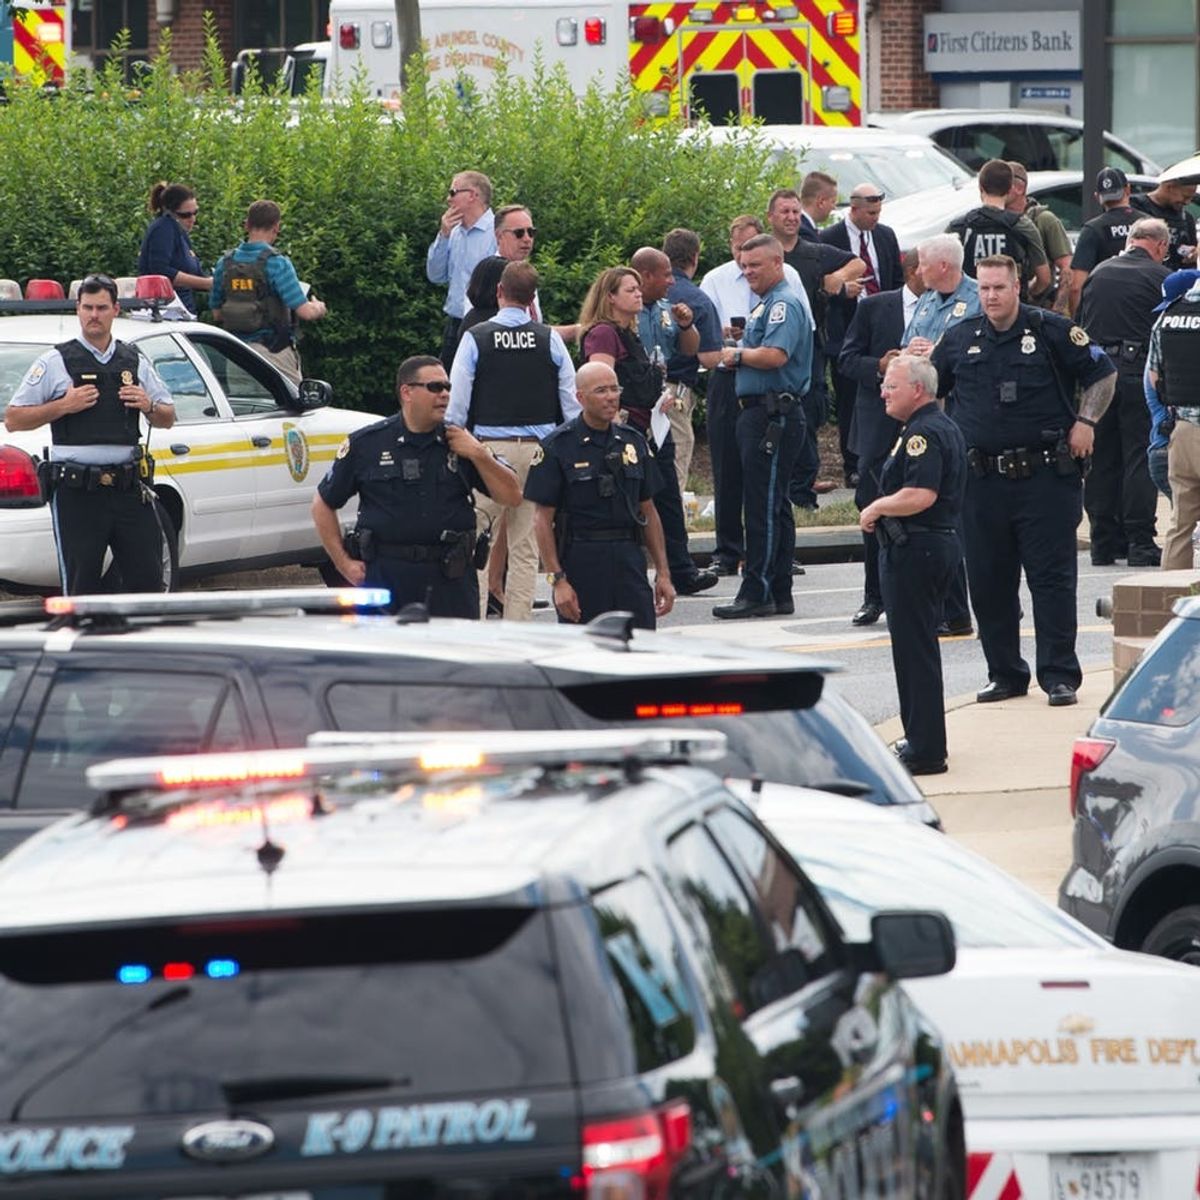 What We Know About the Shooting at Maryland’s ‘Capital Gazette’ Newspaper Office